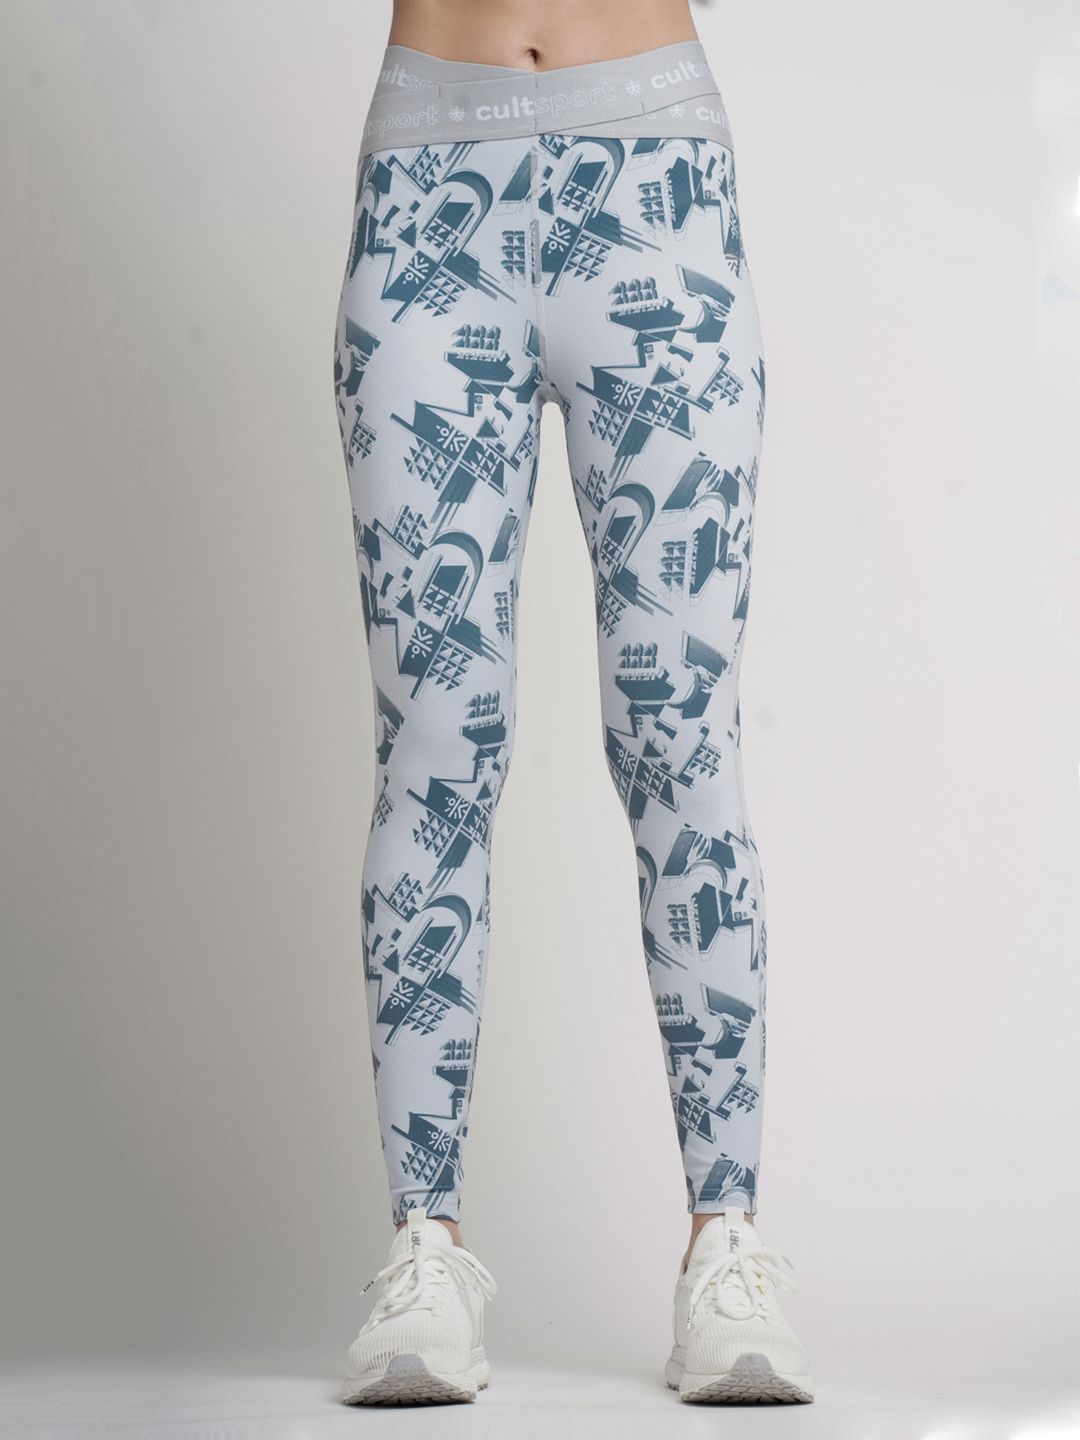 Cultsport Women White & Grey Printed Tights Price in India